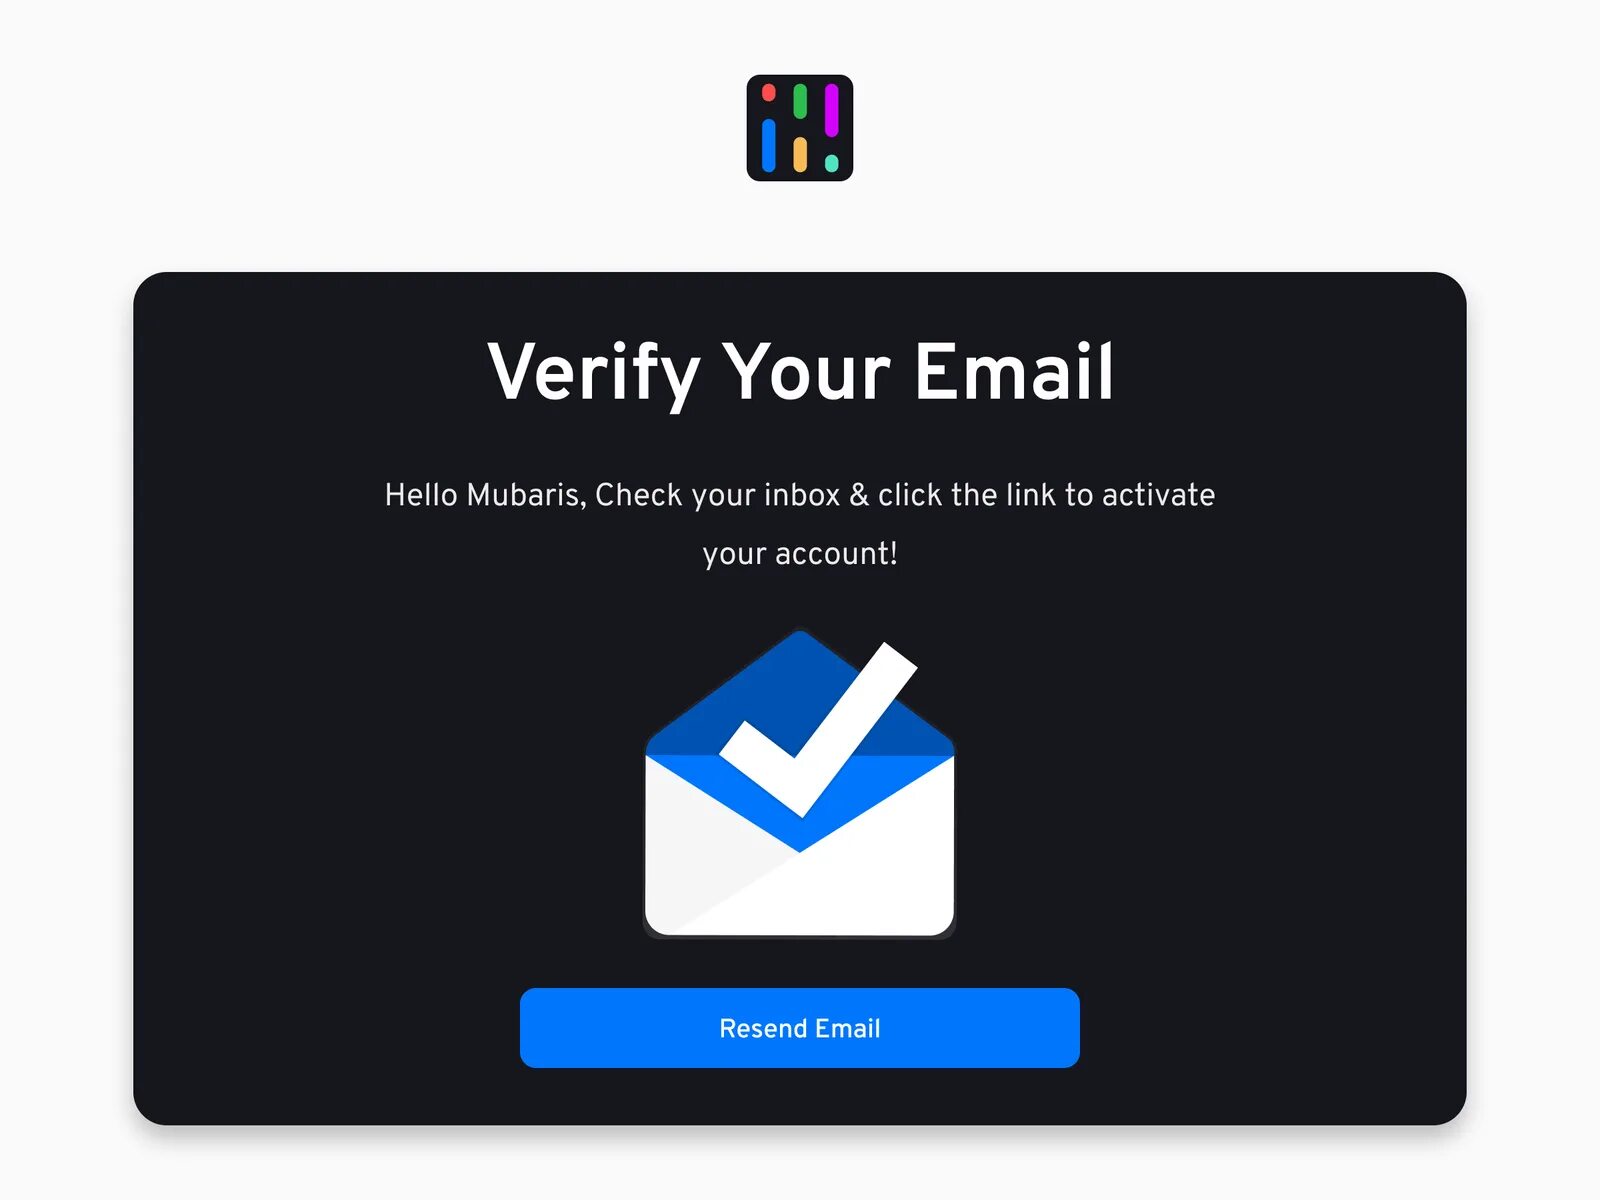 Verify email. Verify your email. Верификация email. Верифицирован email. Verification email sent please check your email